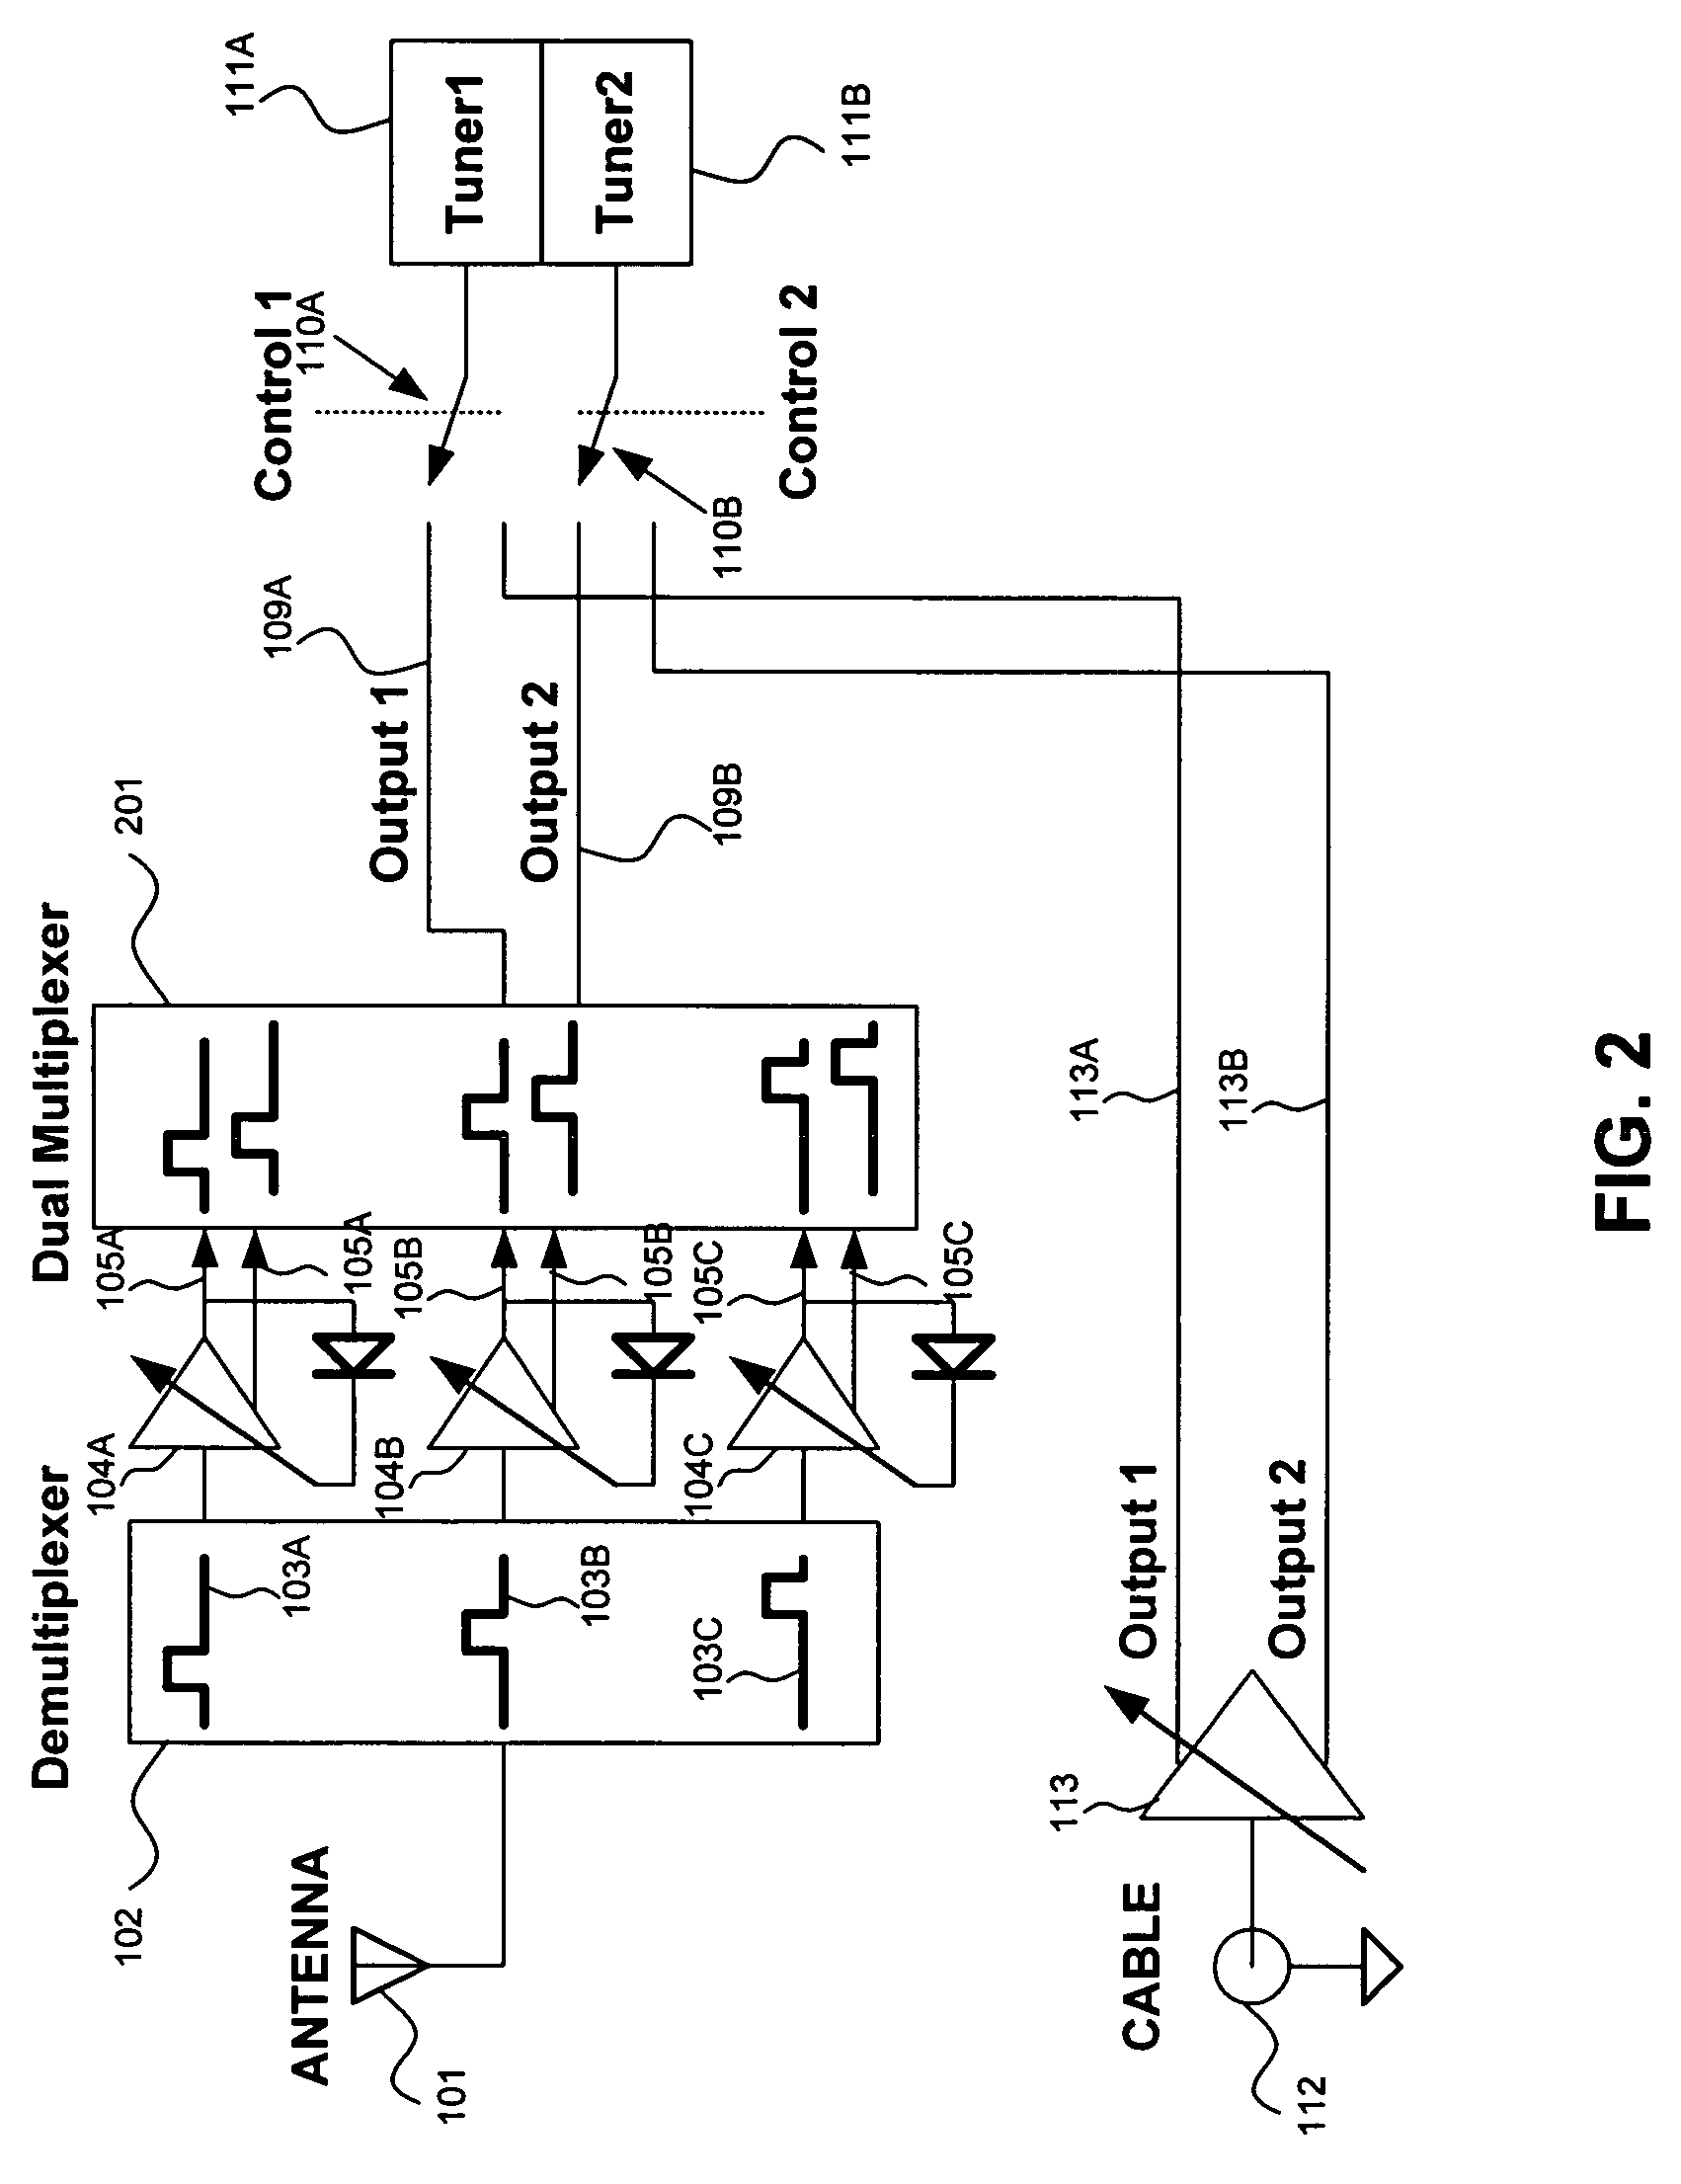 Multi-input multi-output tuner front ends